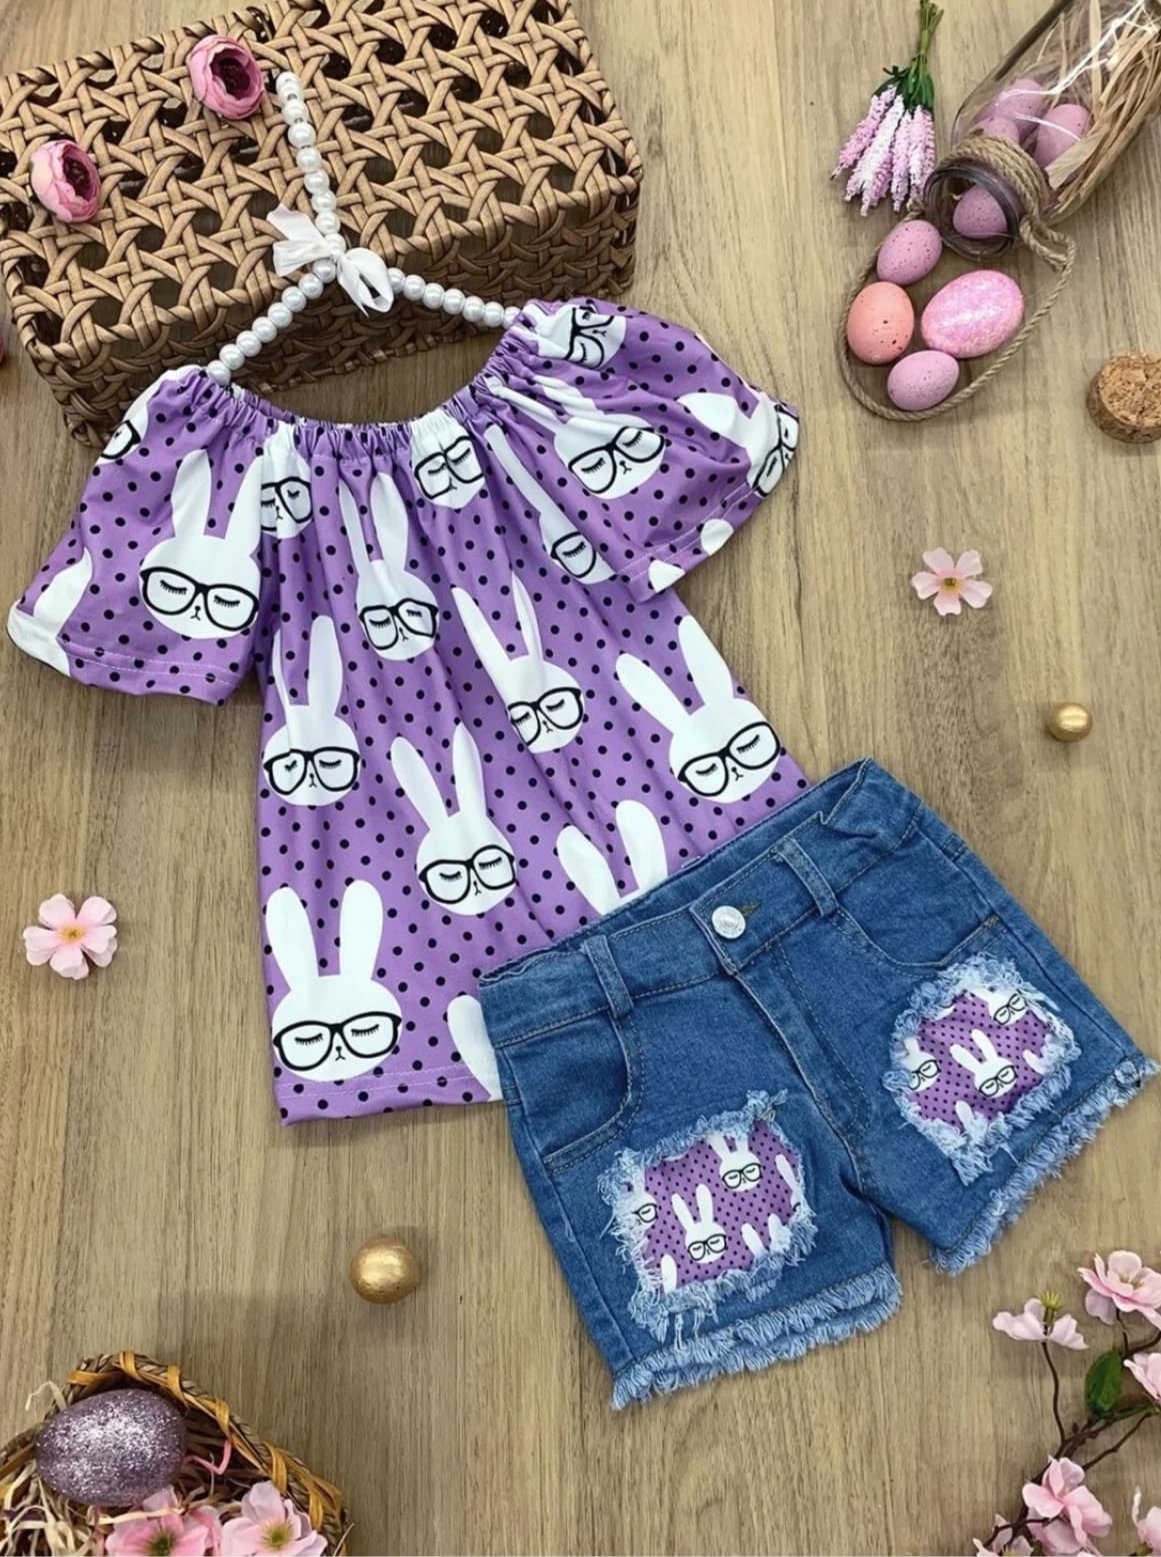 Girls Set features a polka dot bunny print pattern and matching patched denim shorts - Girls Spring Casual Set